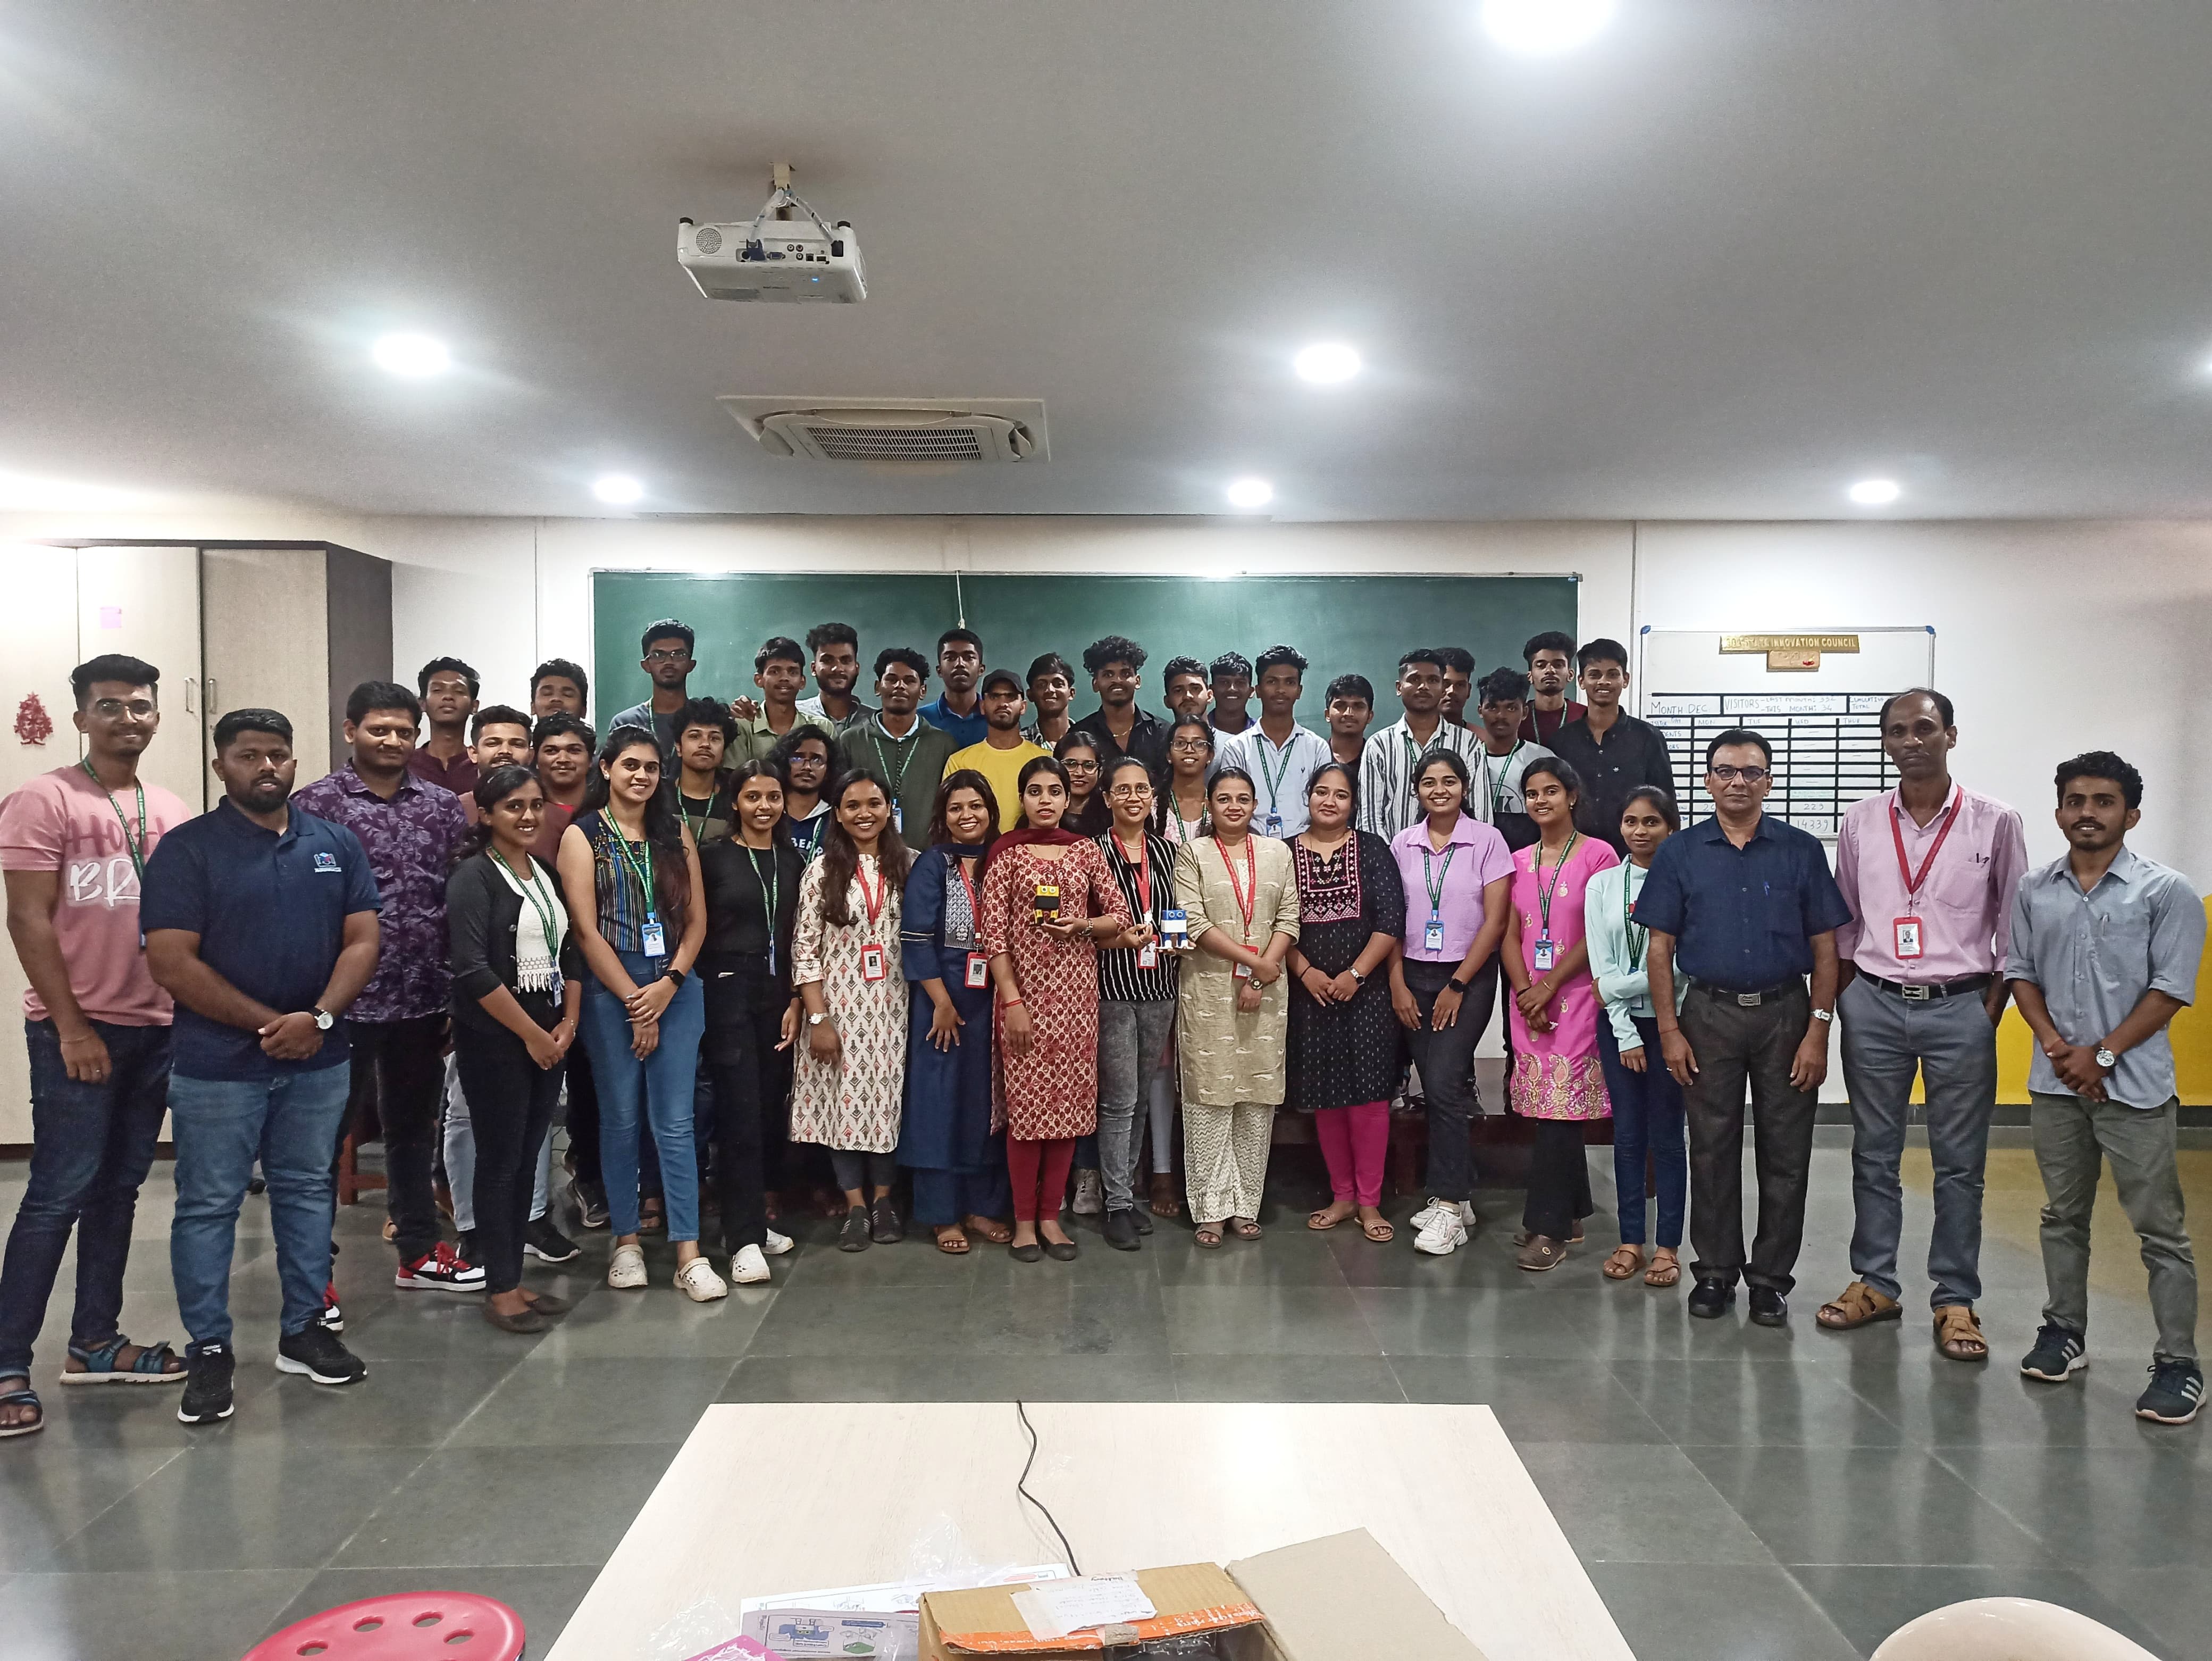 Think, Design, Prototyping session and Workshop on 3D Printing and Robotics for the students of Govt. College of Arts, Science and Commerce, Quepem Goa